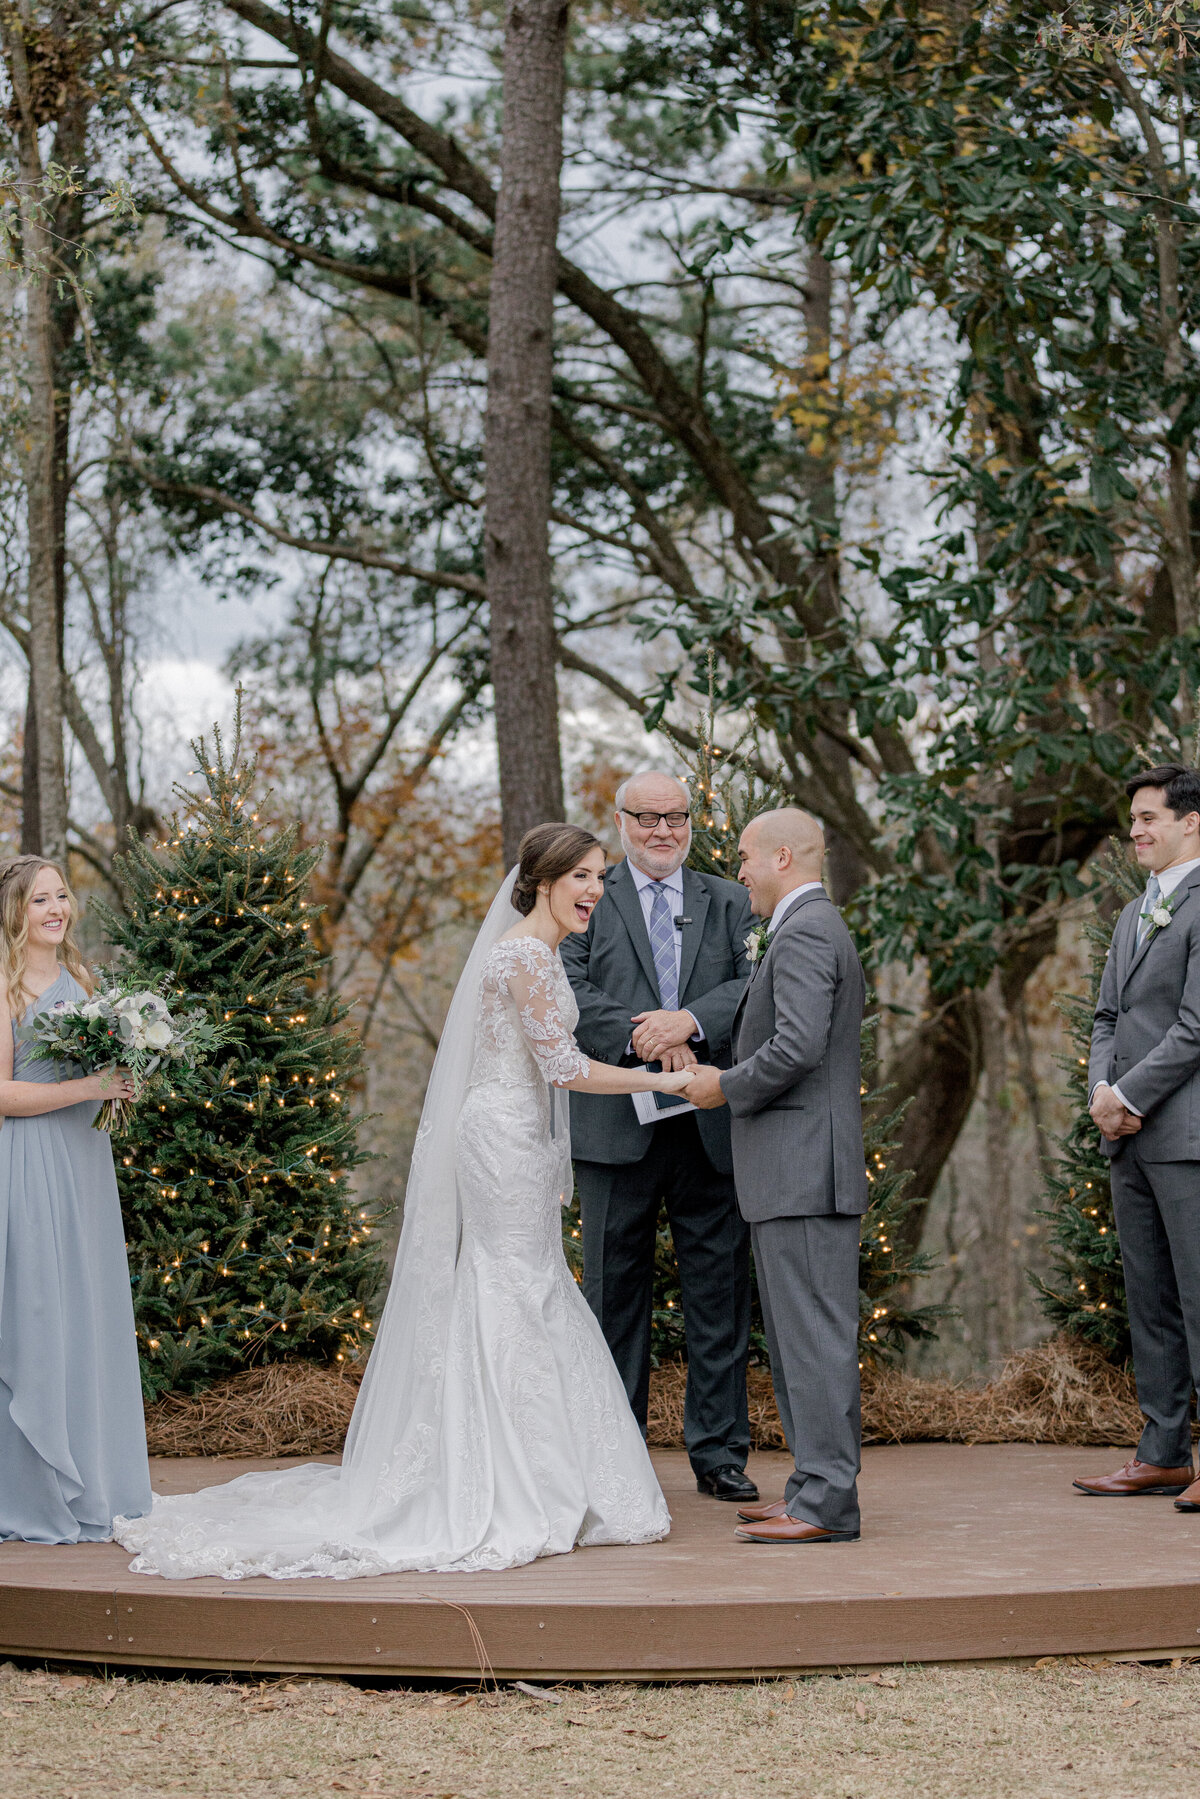 Jessie Newton Photography-Orozco Wedding-Venue at Anderson Oaks-Lucedale, MS-474